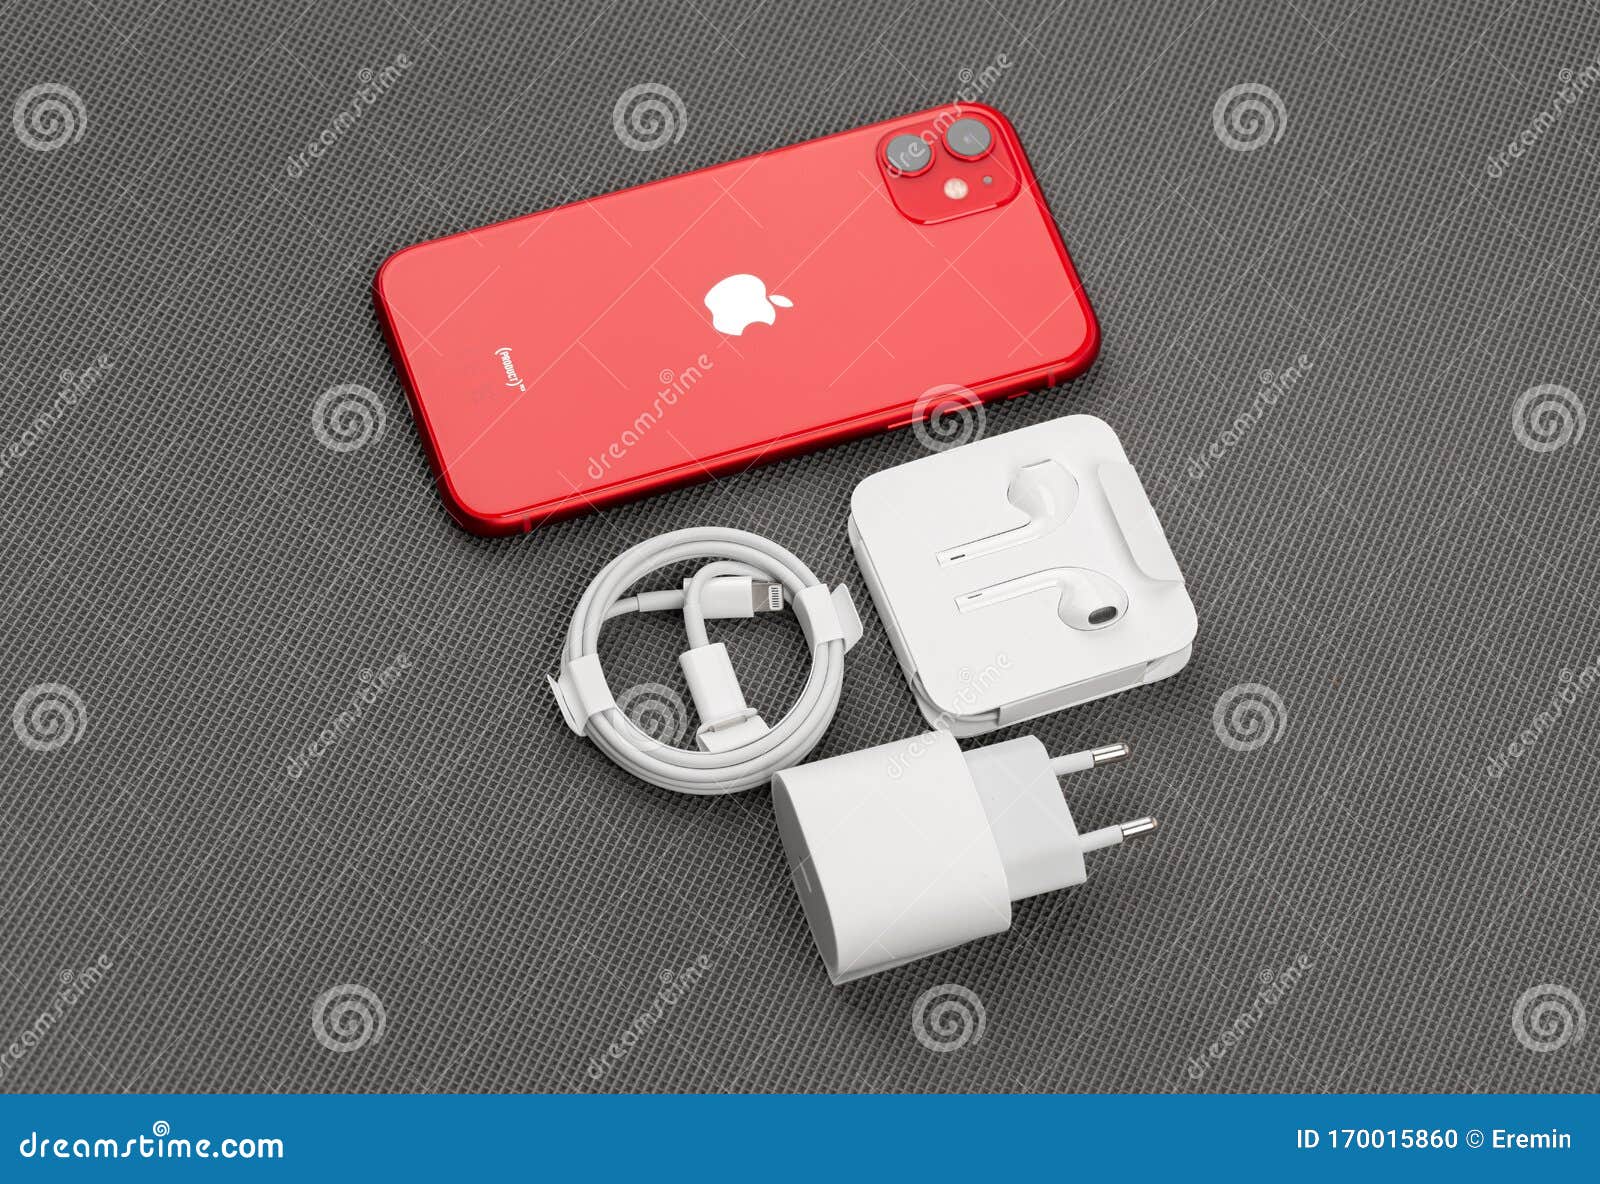 Apple IPhone 11 PRODUCT RED and Kit on a Gray Surface. Editorial Image -  Image of illustrative, internet: 170015860